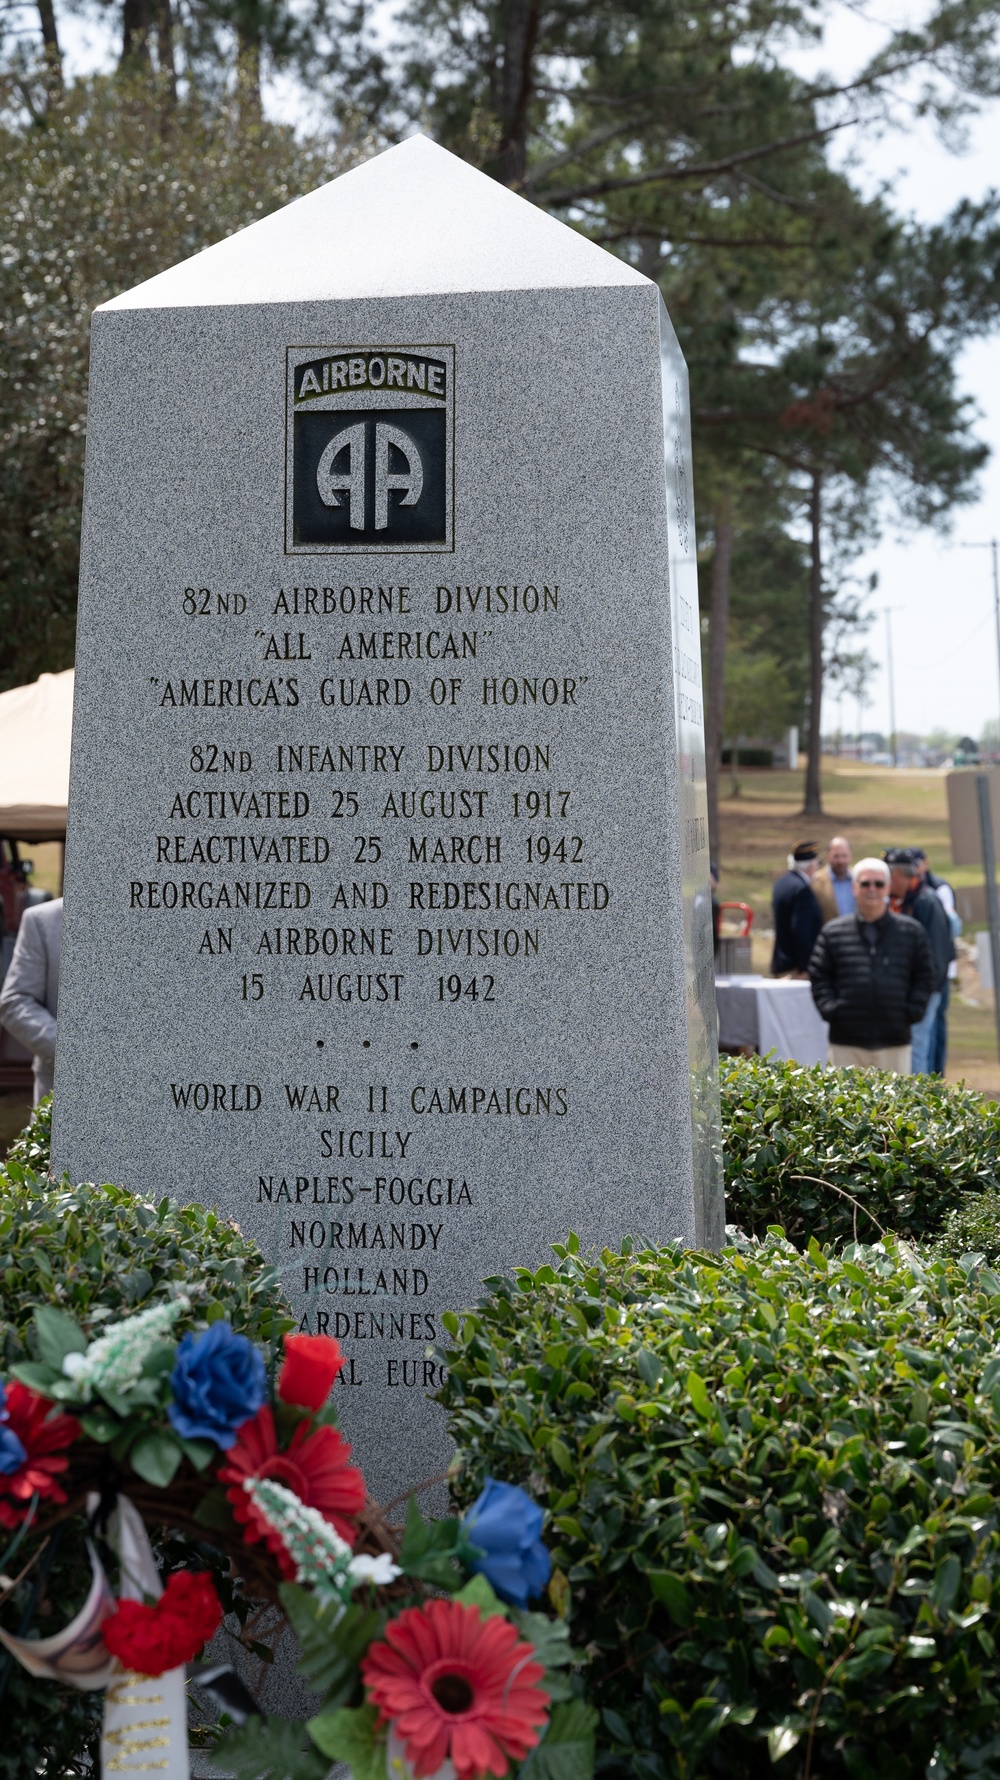 Pope Helps 82nd Airborne Commemorate 1943 Jump